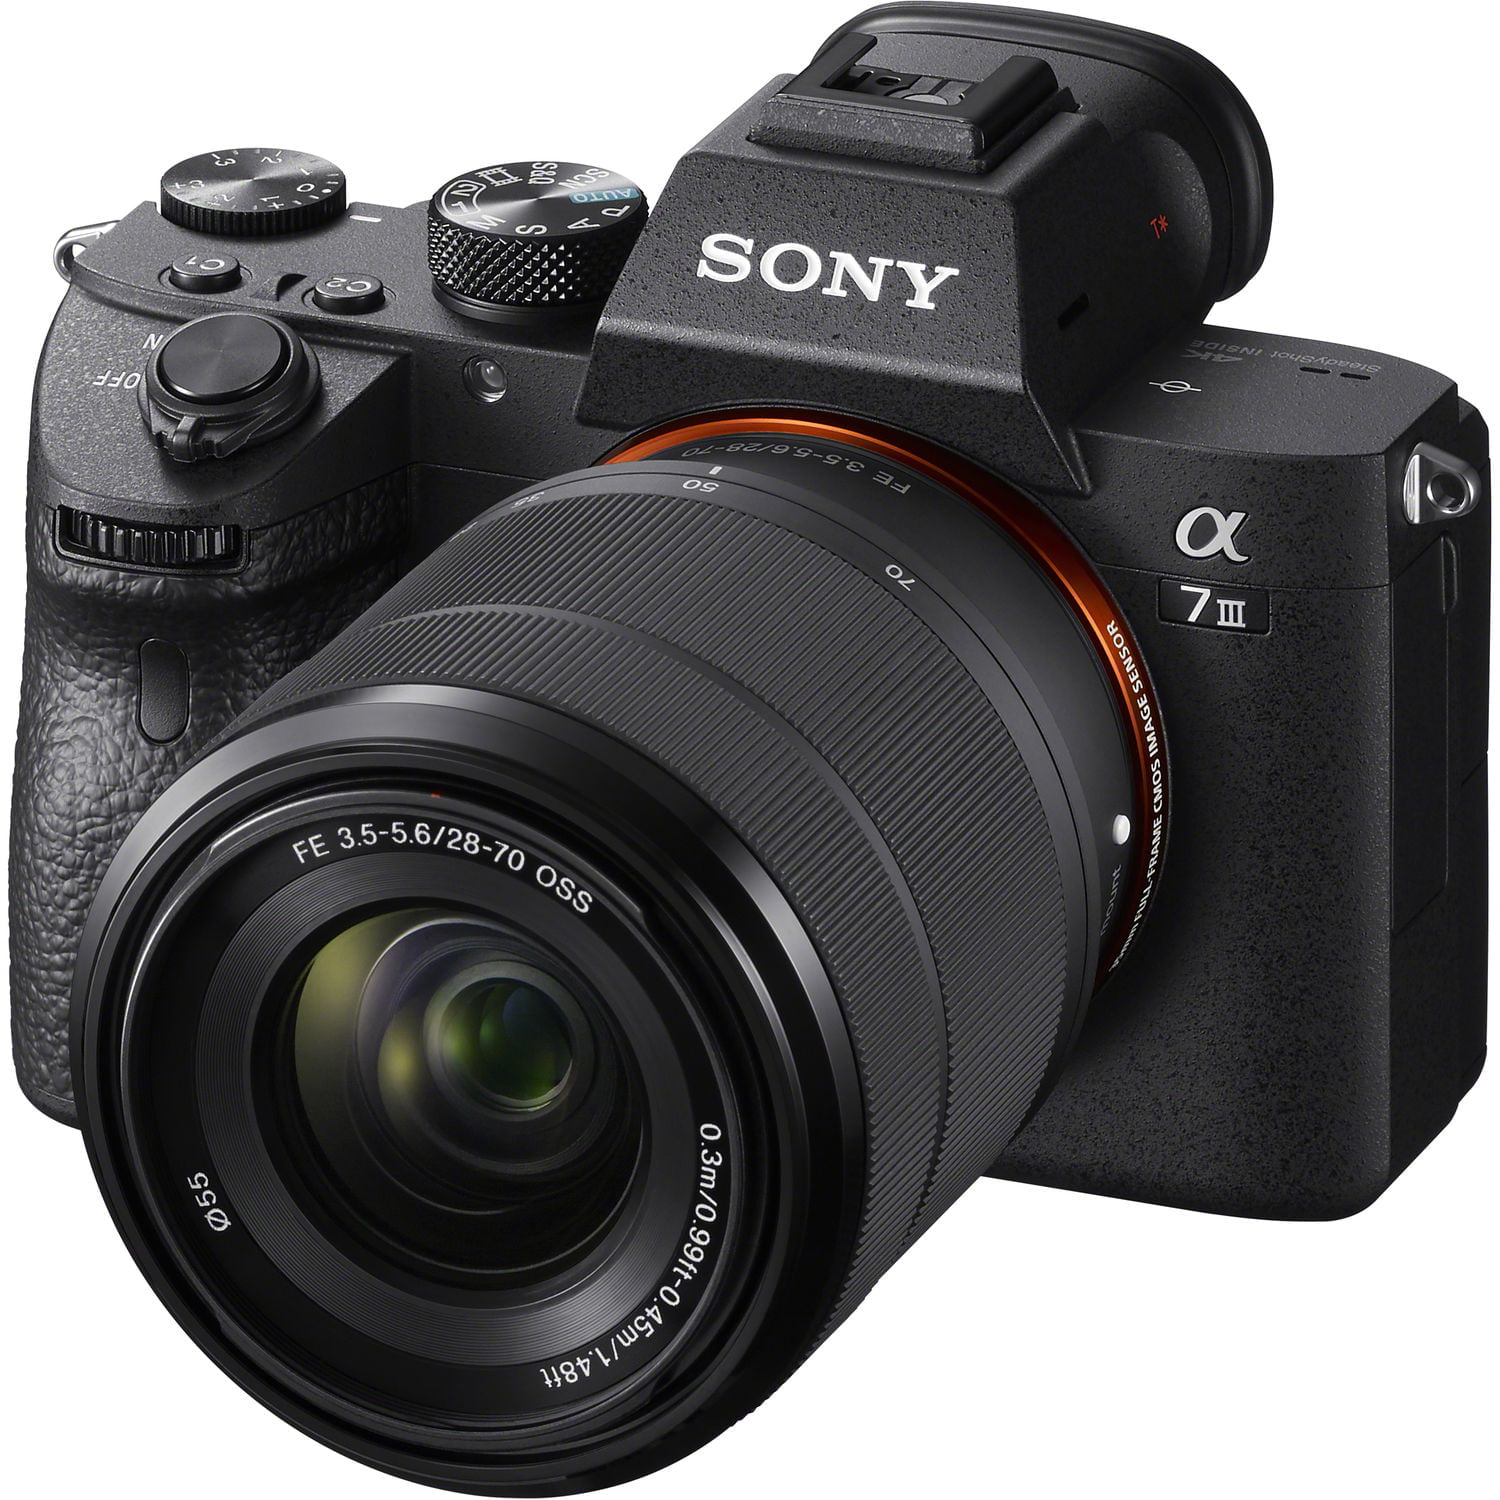 Sony Alpha a7 III Camera with 28-70mm Lens